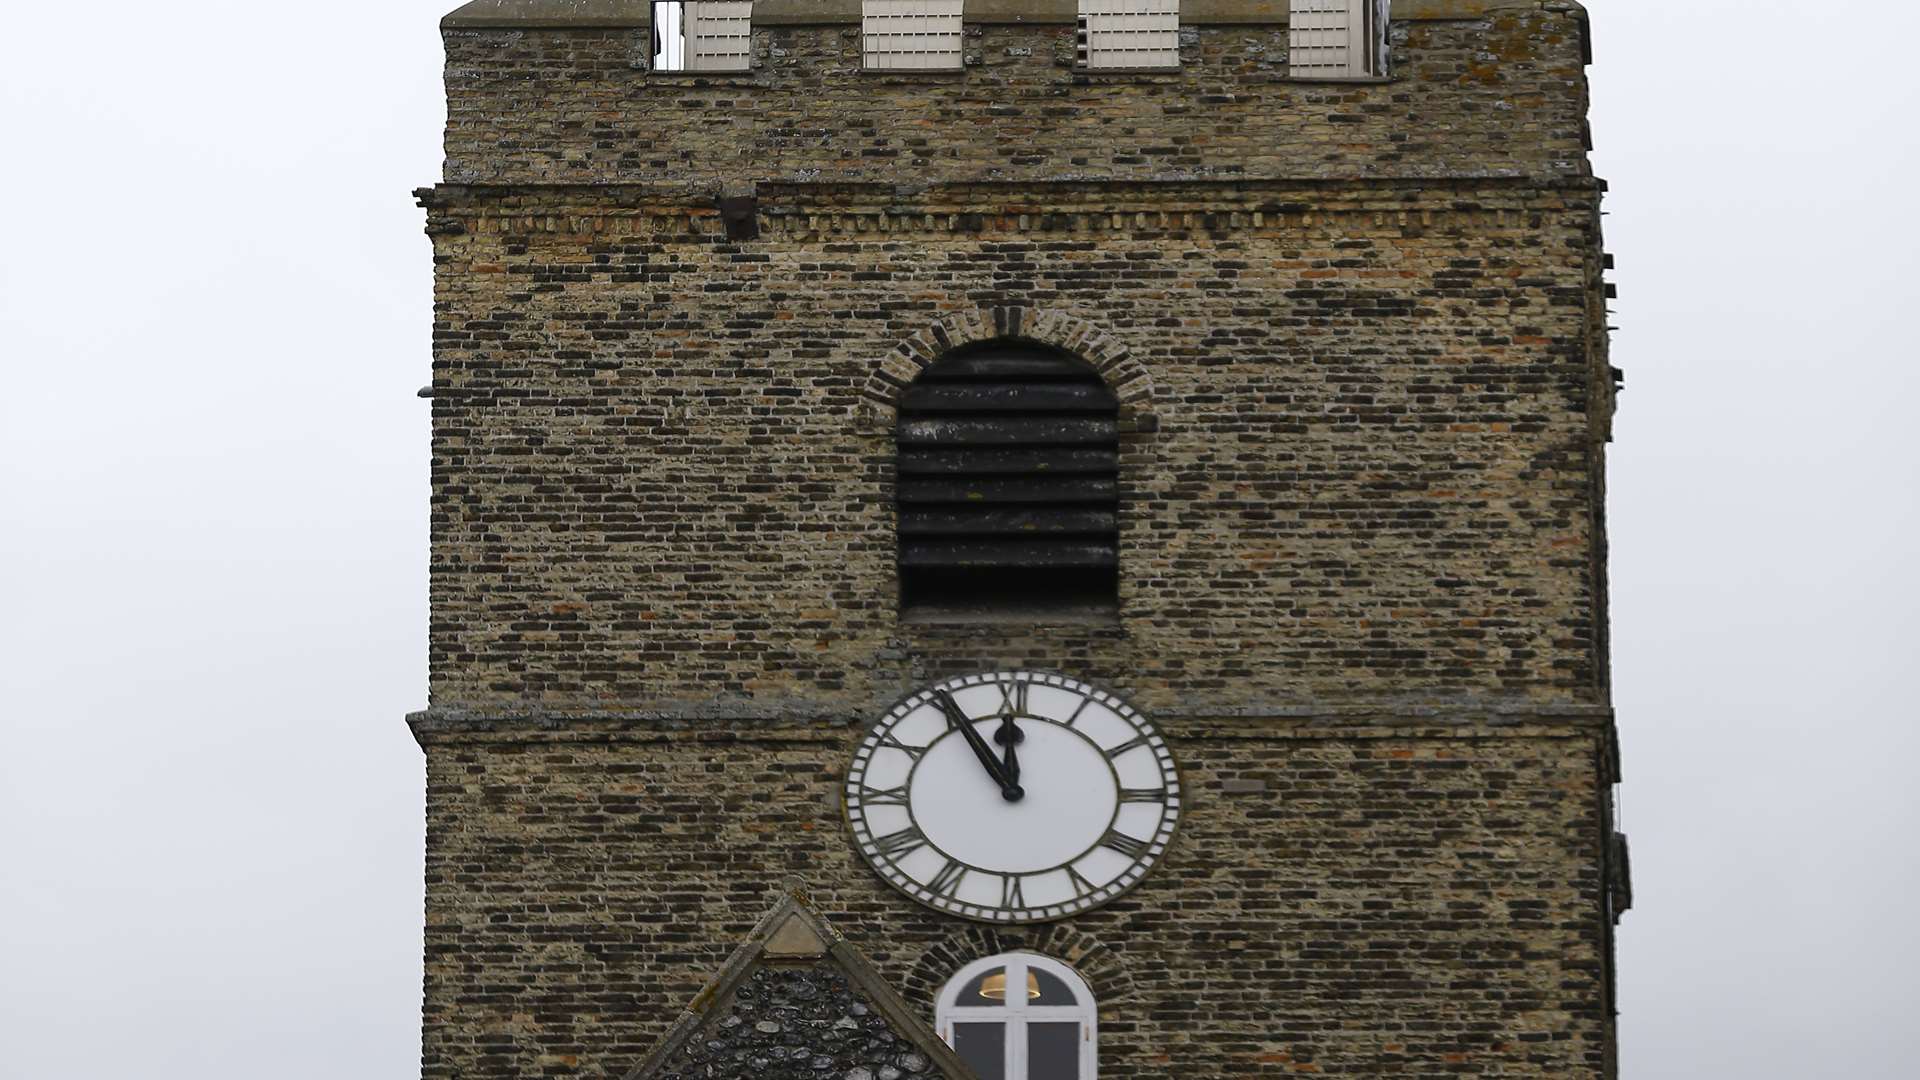 St Peter's church clock could be stopped from chiming at night